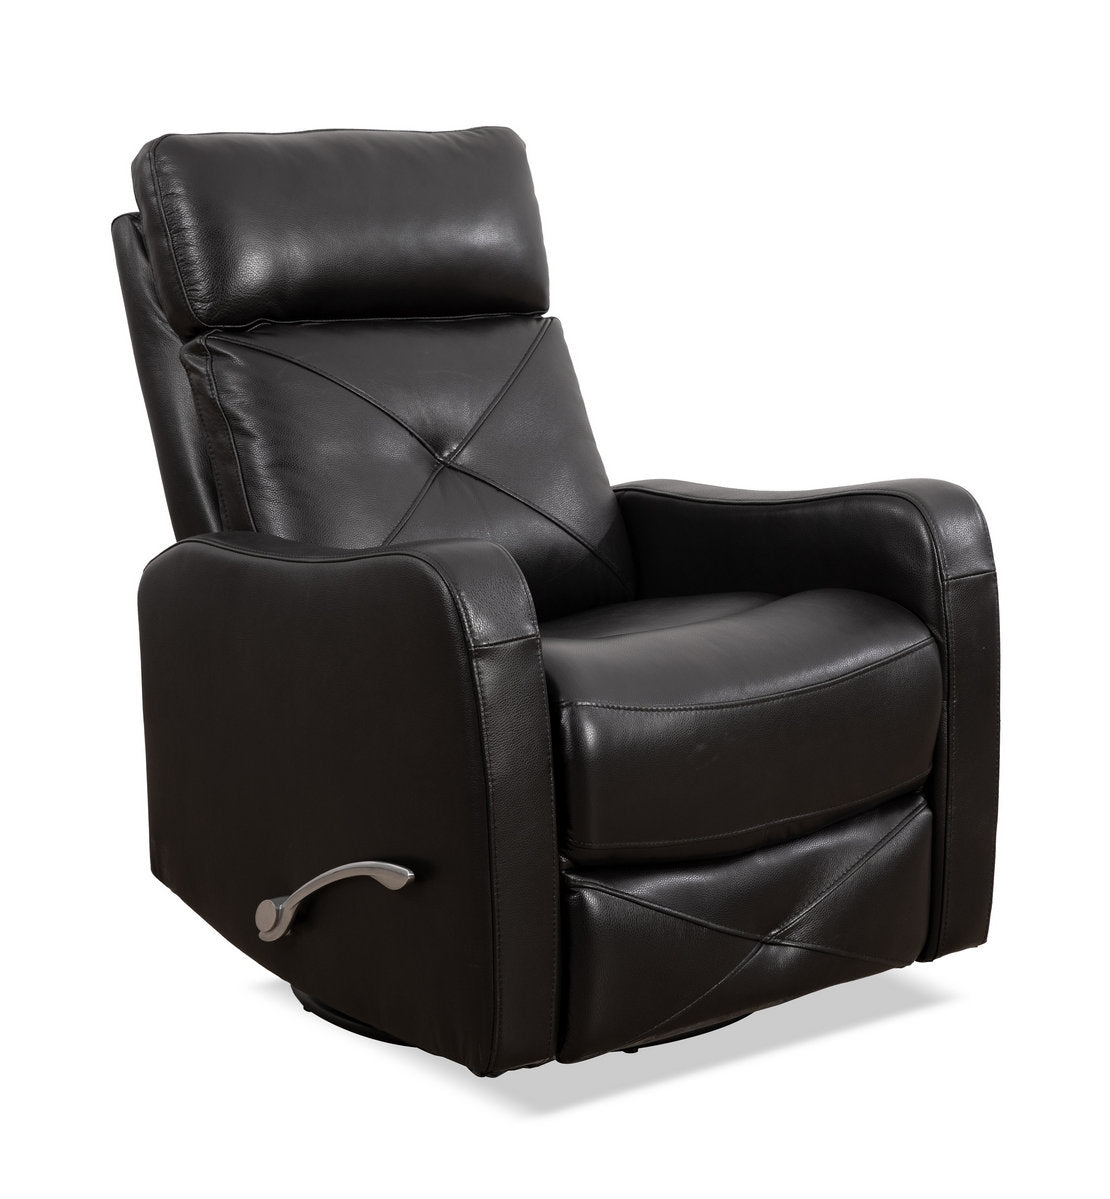 Swivel Recliner Chair Blackberry Leather Match 6332